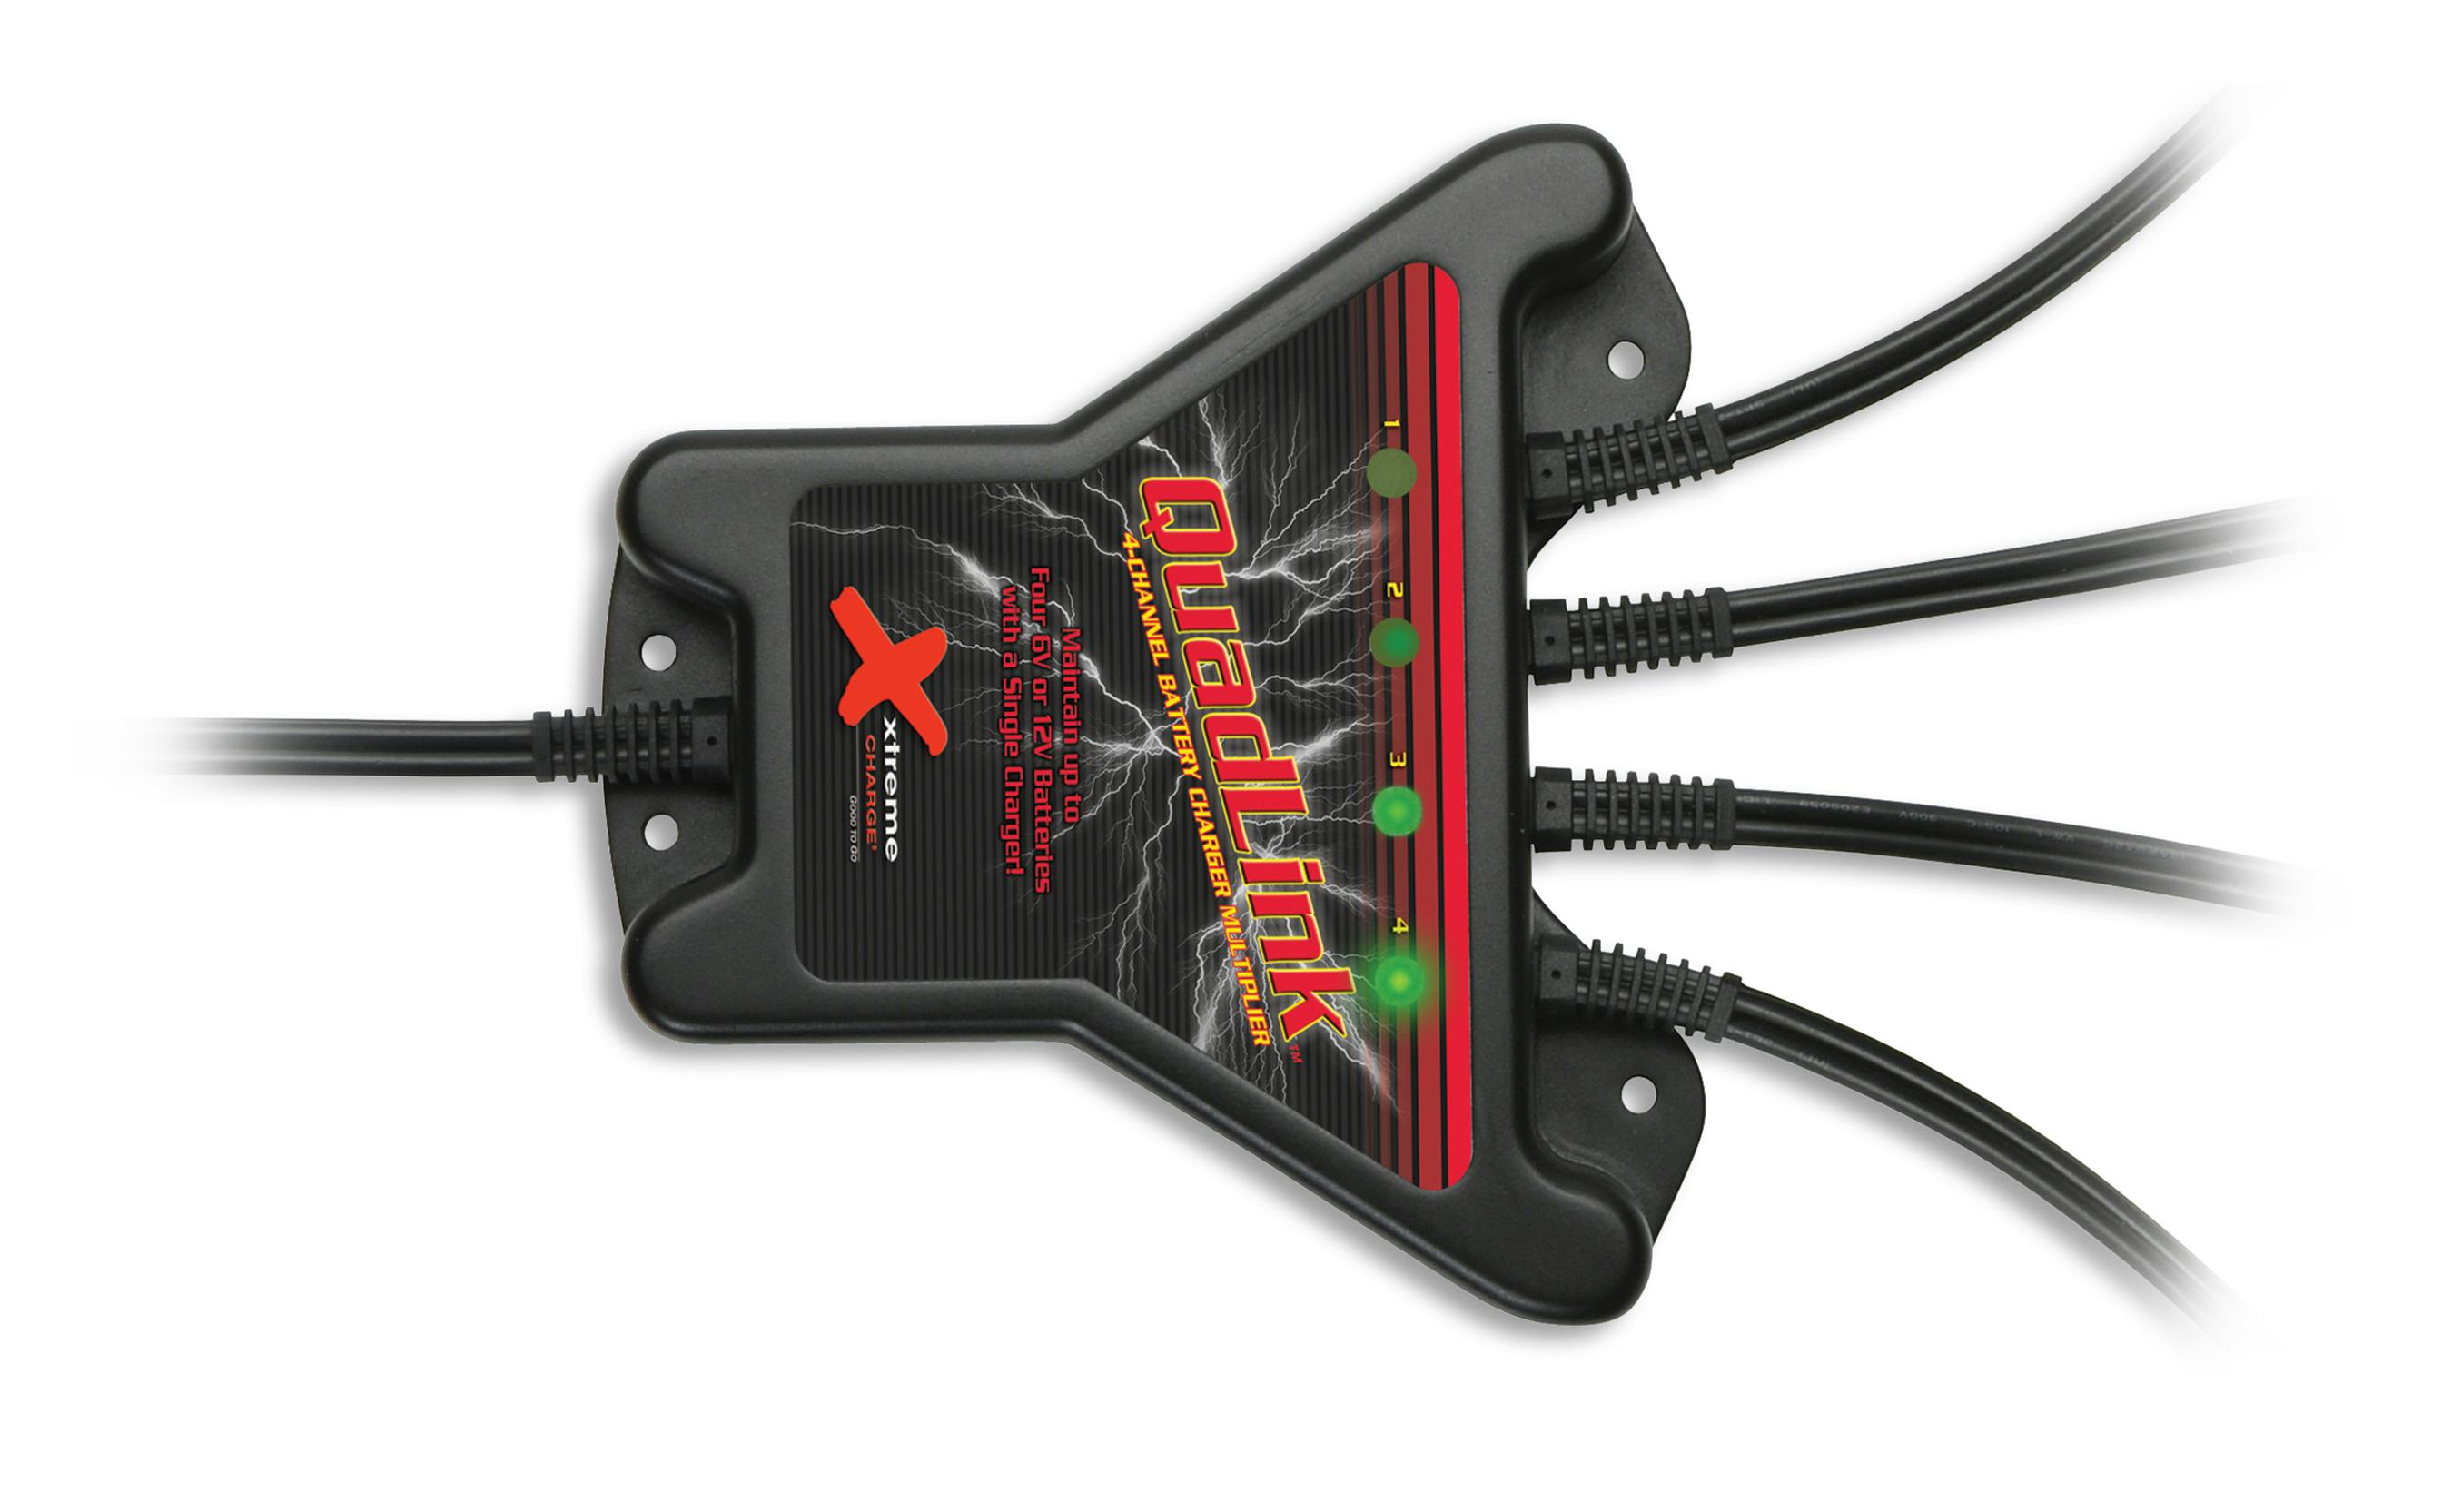 Specialized Products Co. Introduces QuadLink Four-Station Battery Charger